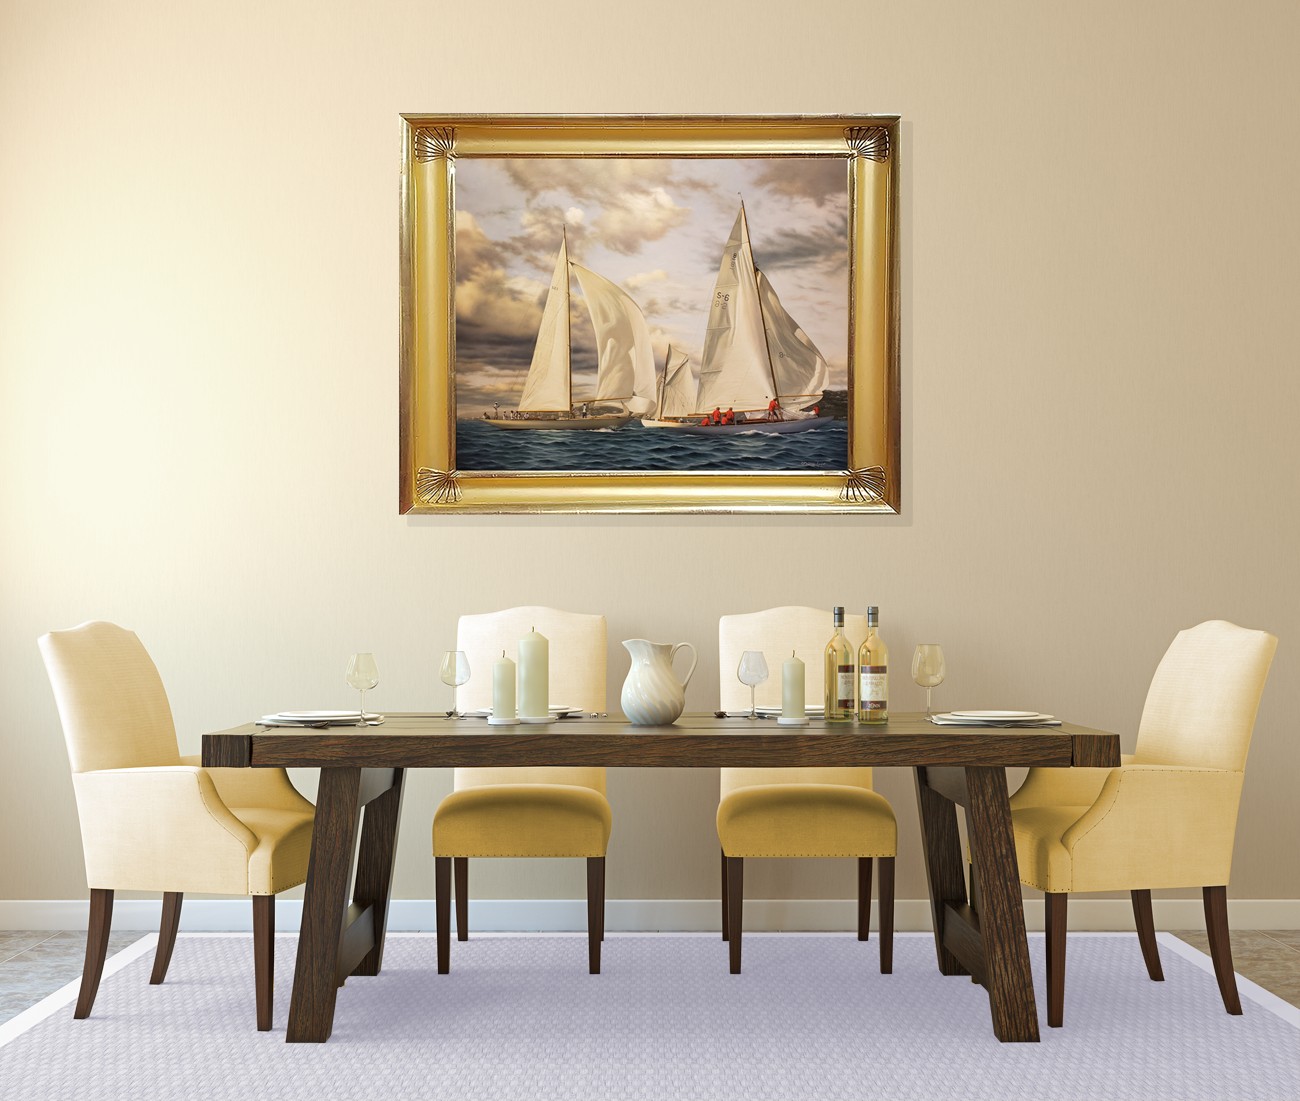 24x36COSTAL CRUISE GOLD FRAAMEdiningroom-Recovered